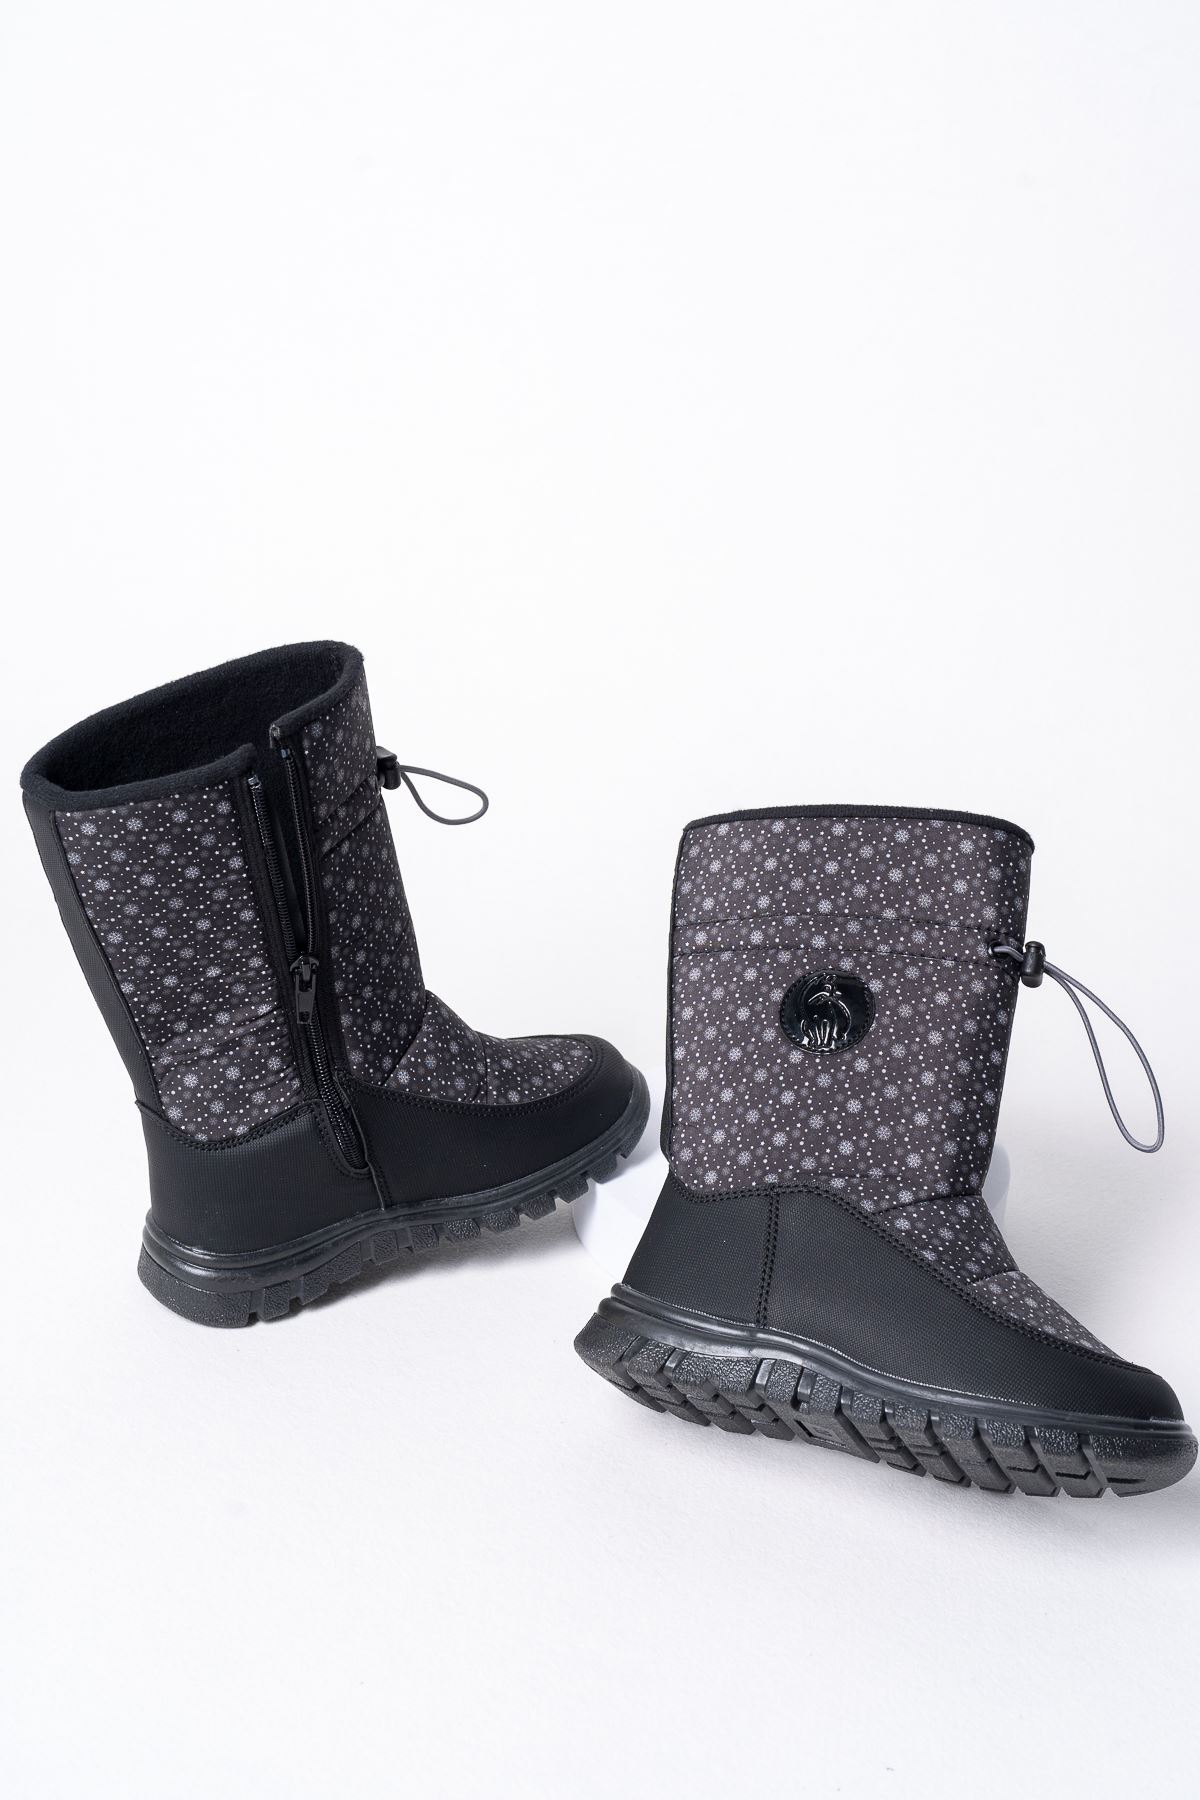 Black Printed Parachute Snow Boots with Elastic